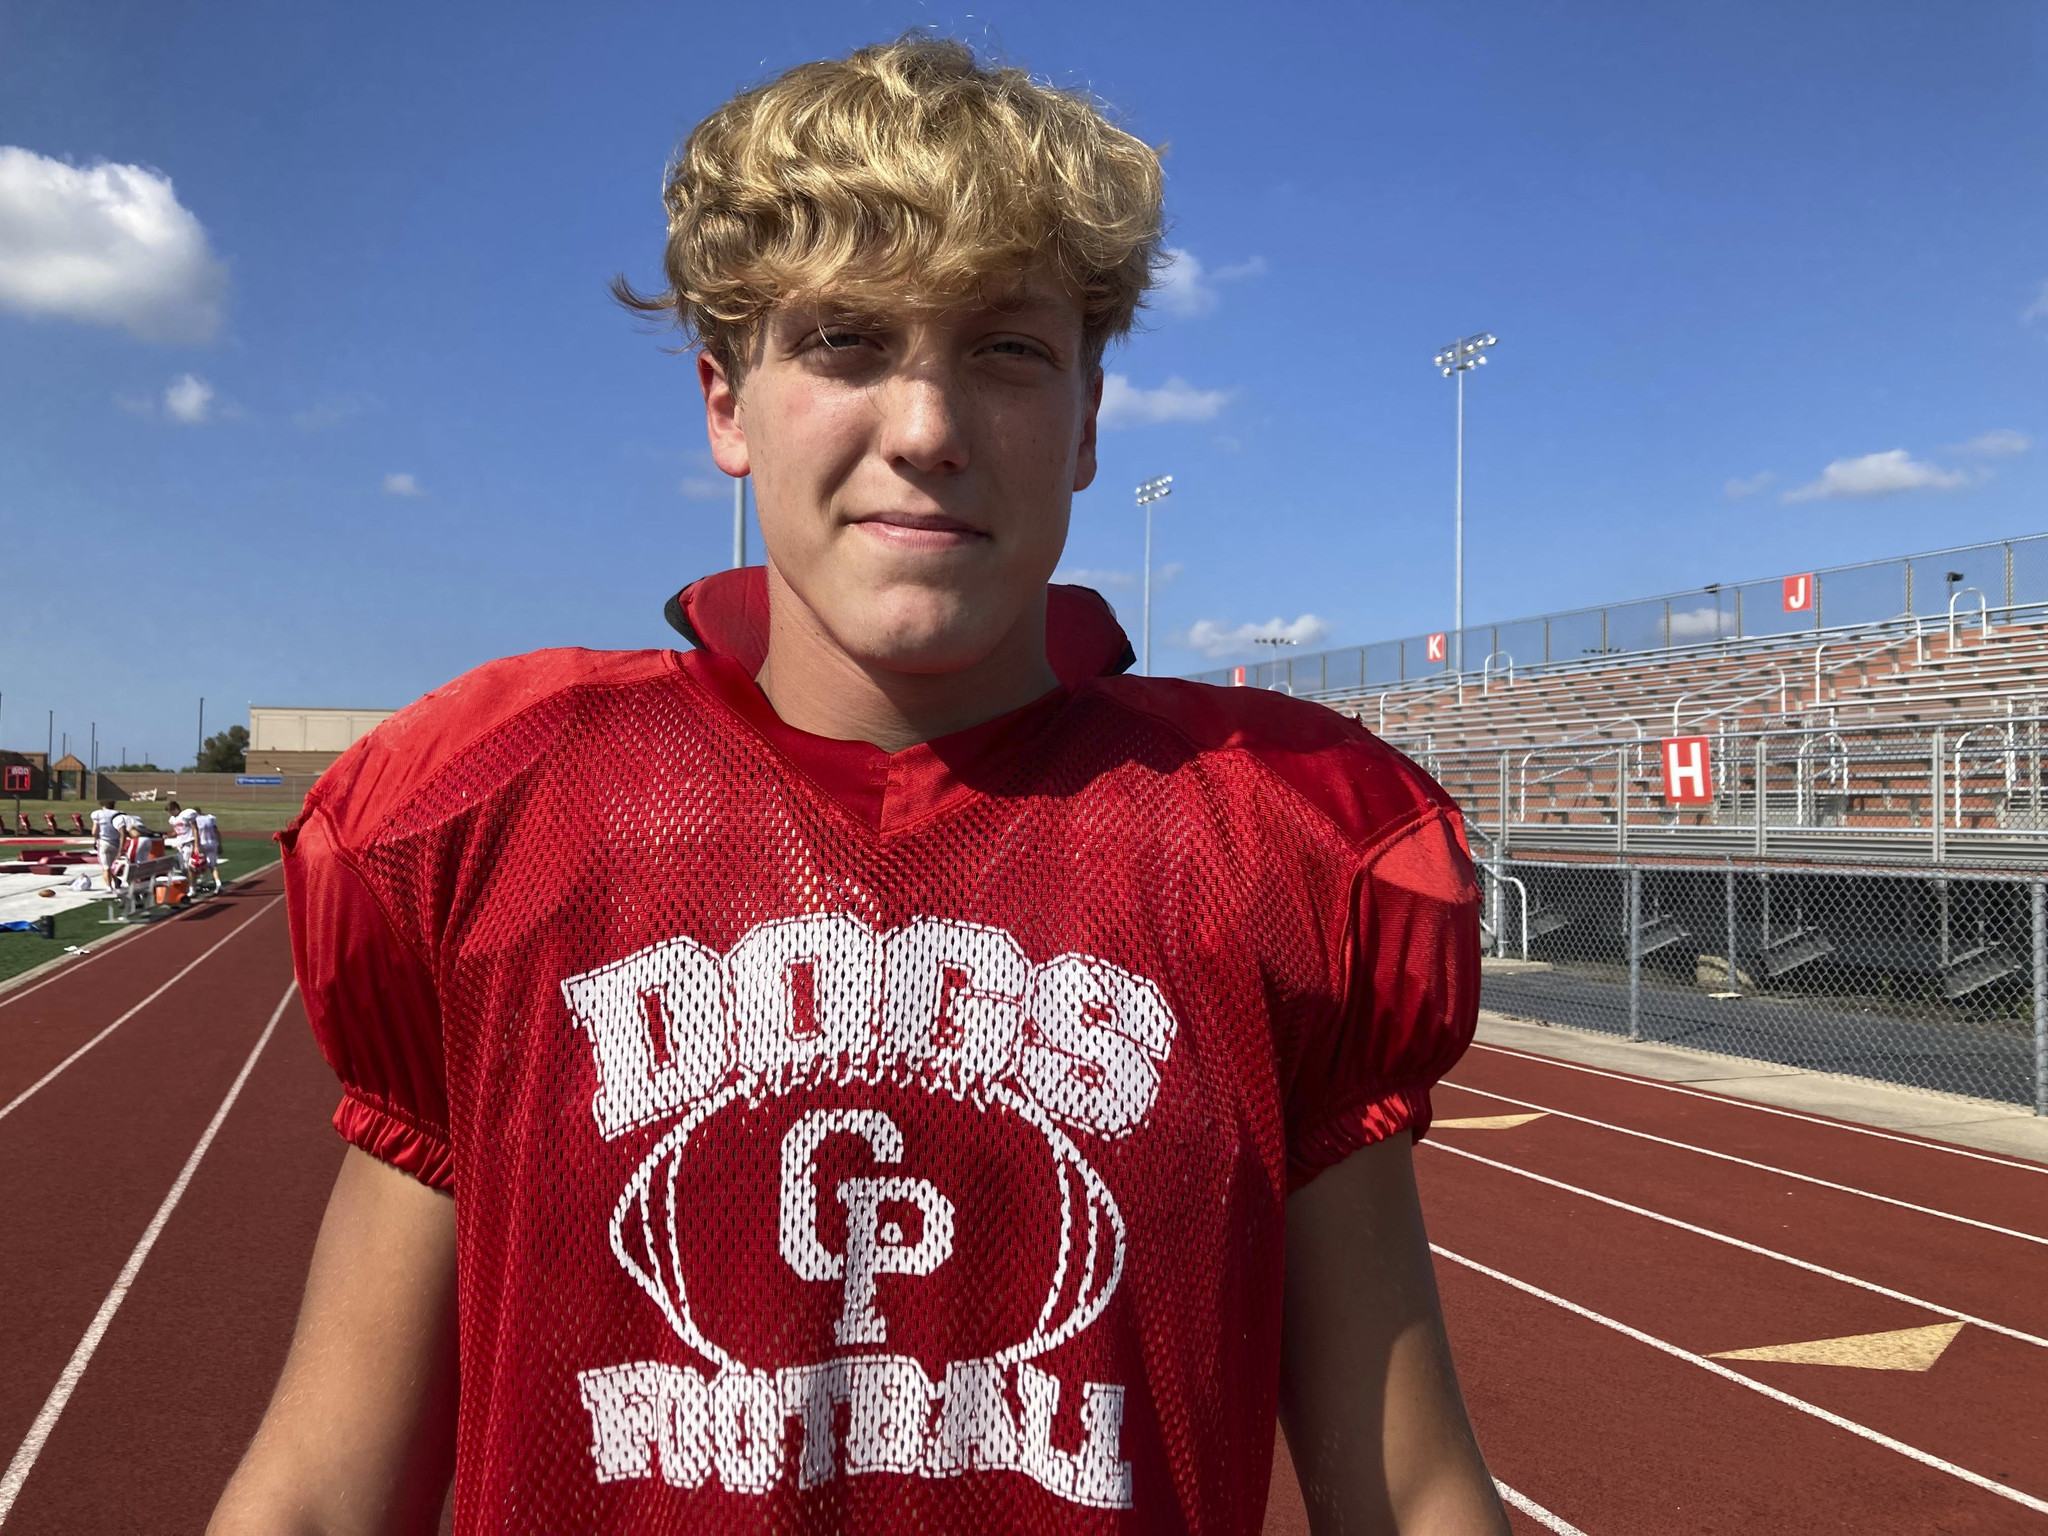 Will Clark pins down role as Crown Point's defensive leader